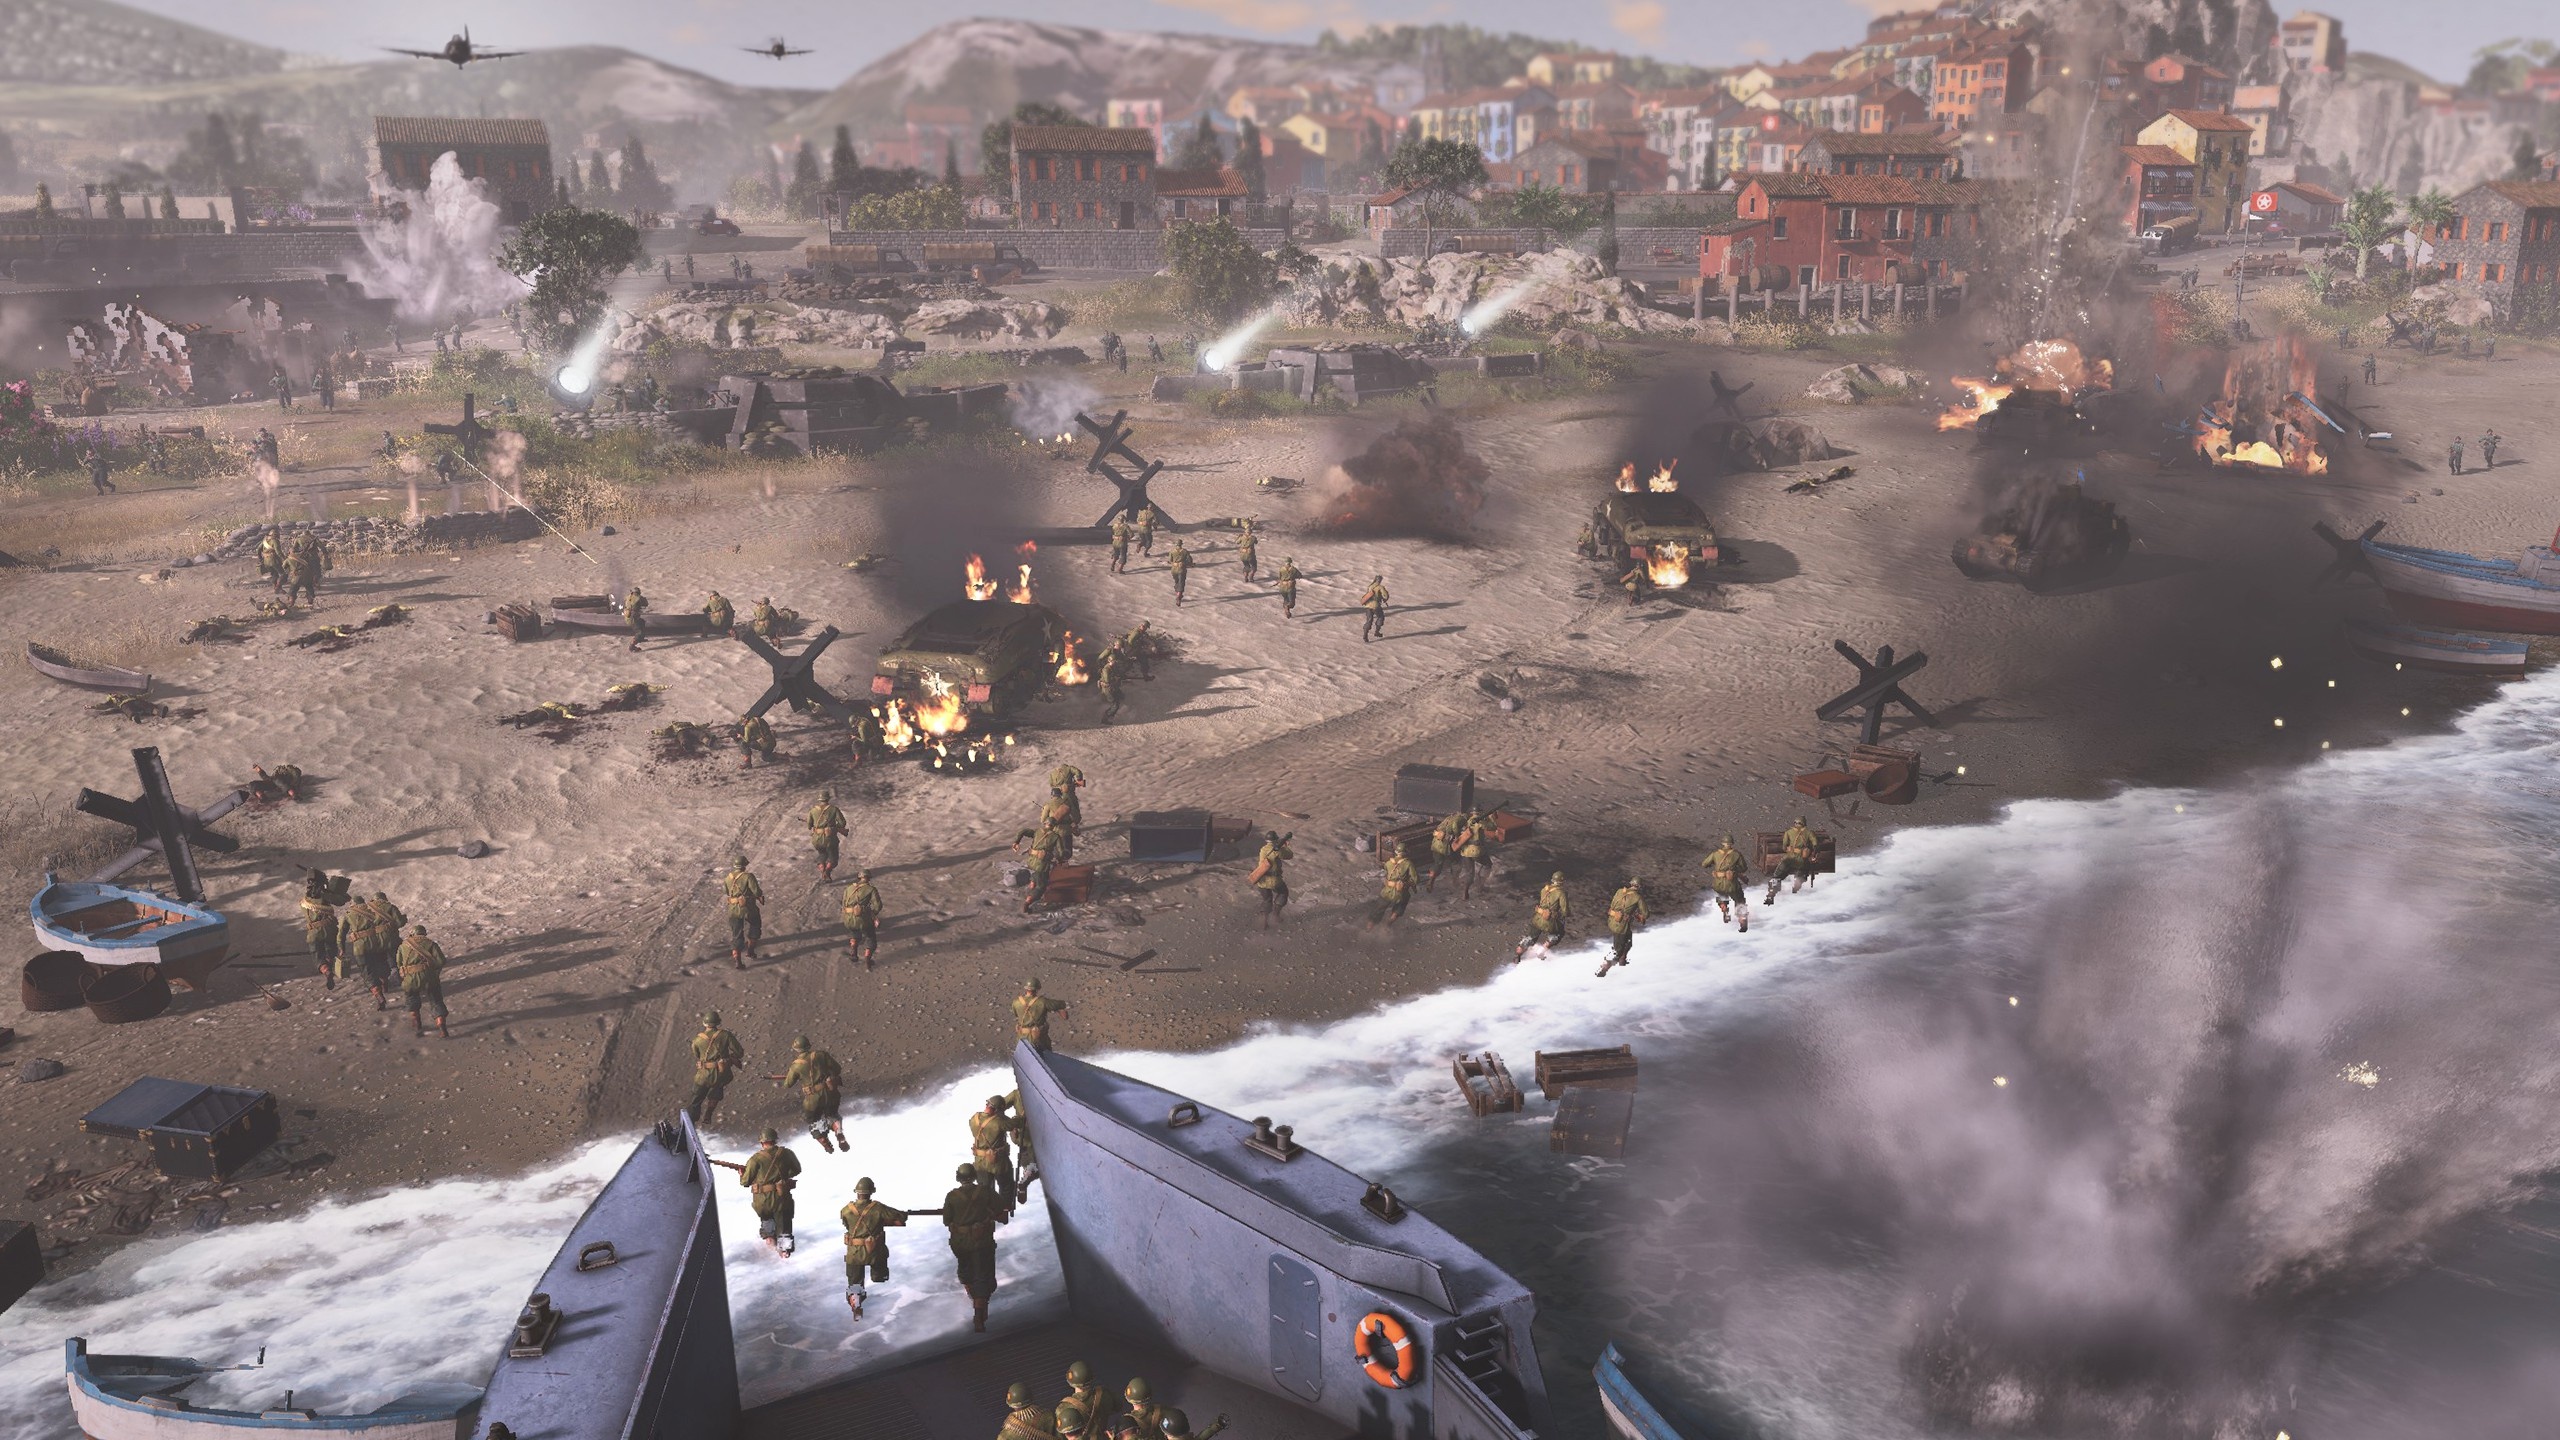 Company of Heroes 3: The game set in a Mediterranean environment, with fighting throughout Italy and Africa. 2560x1440 HD Background.